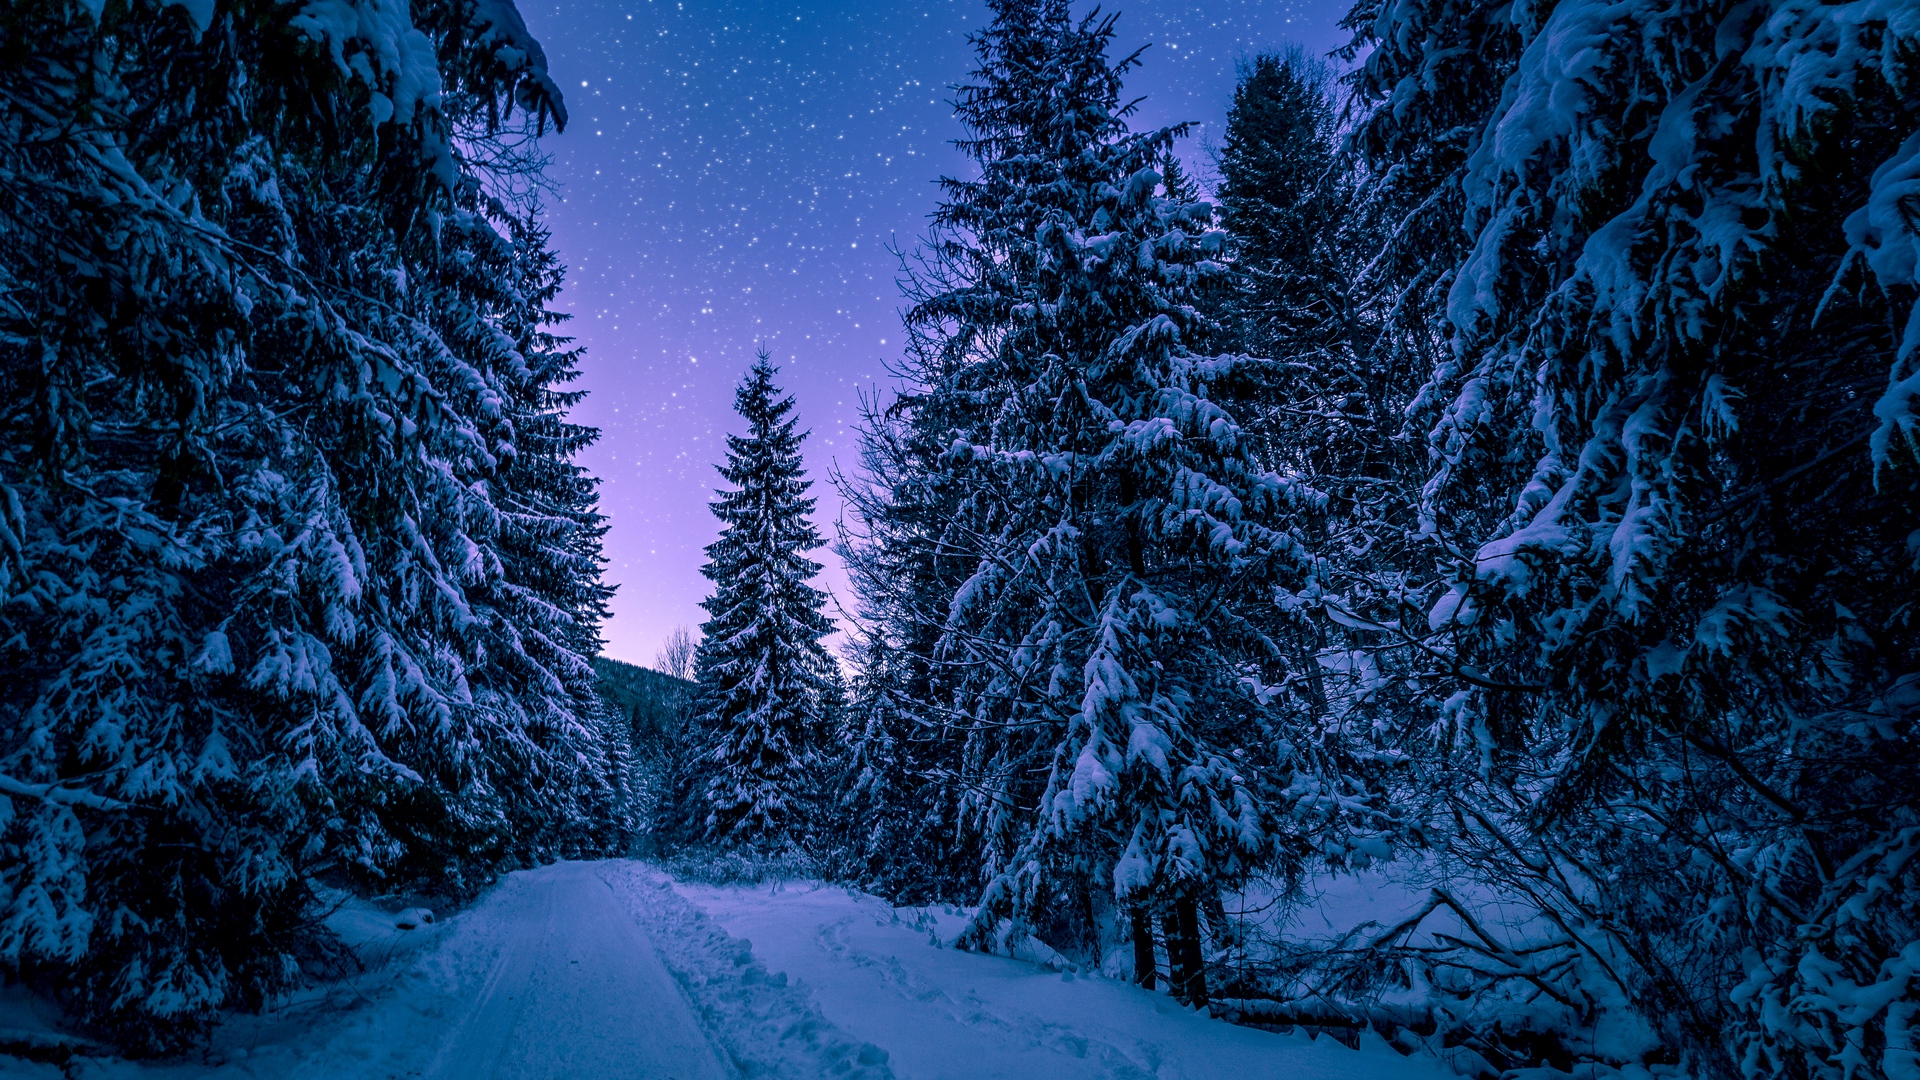 Download wallpaper 1920x1080 winter, forest, road, snow, starry